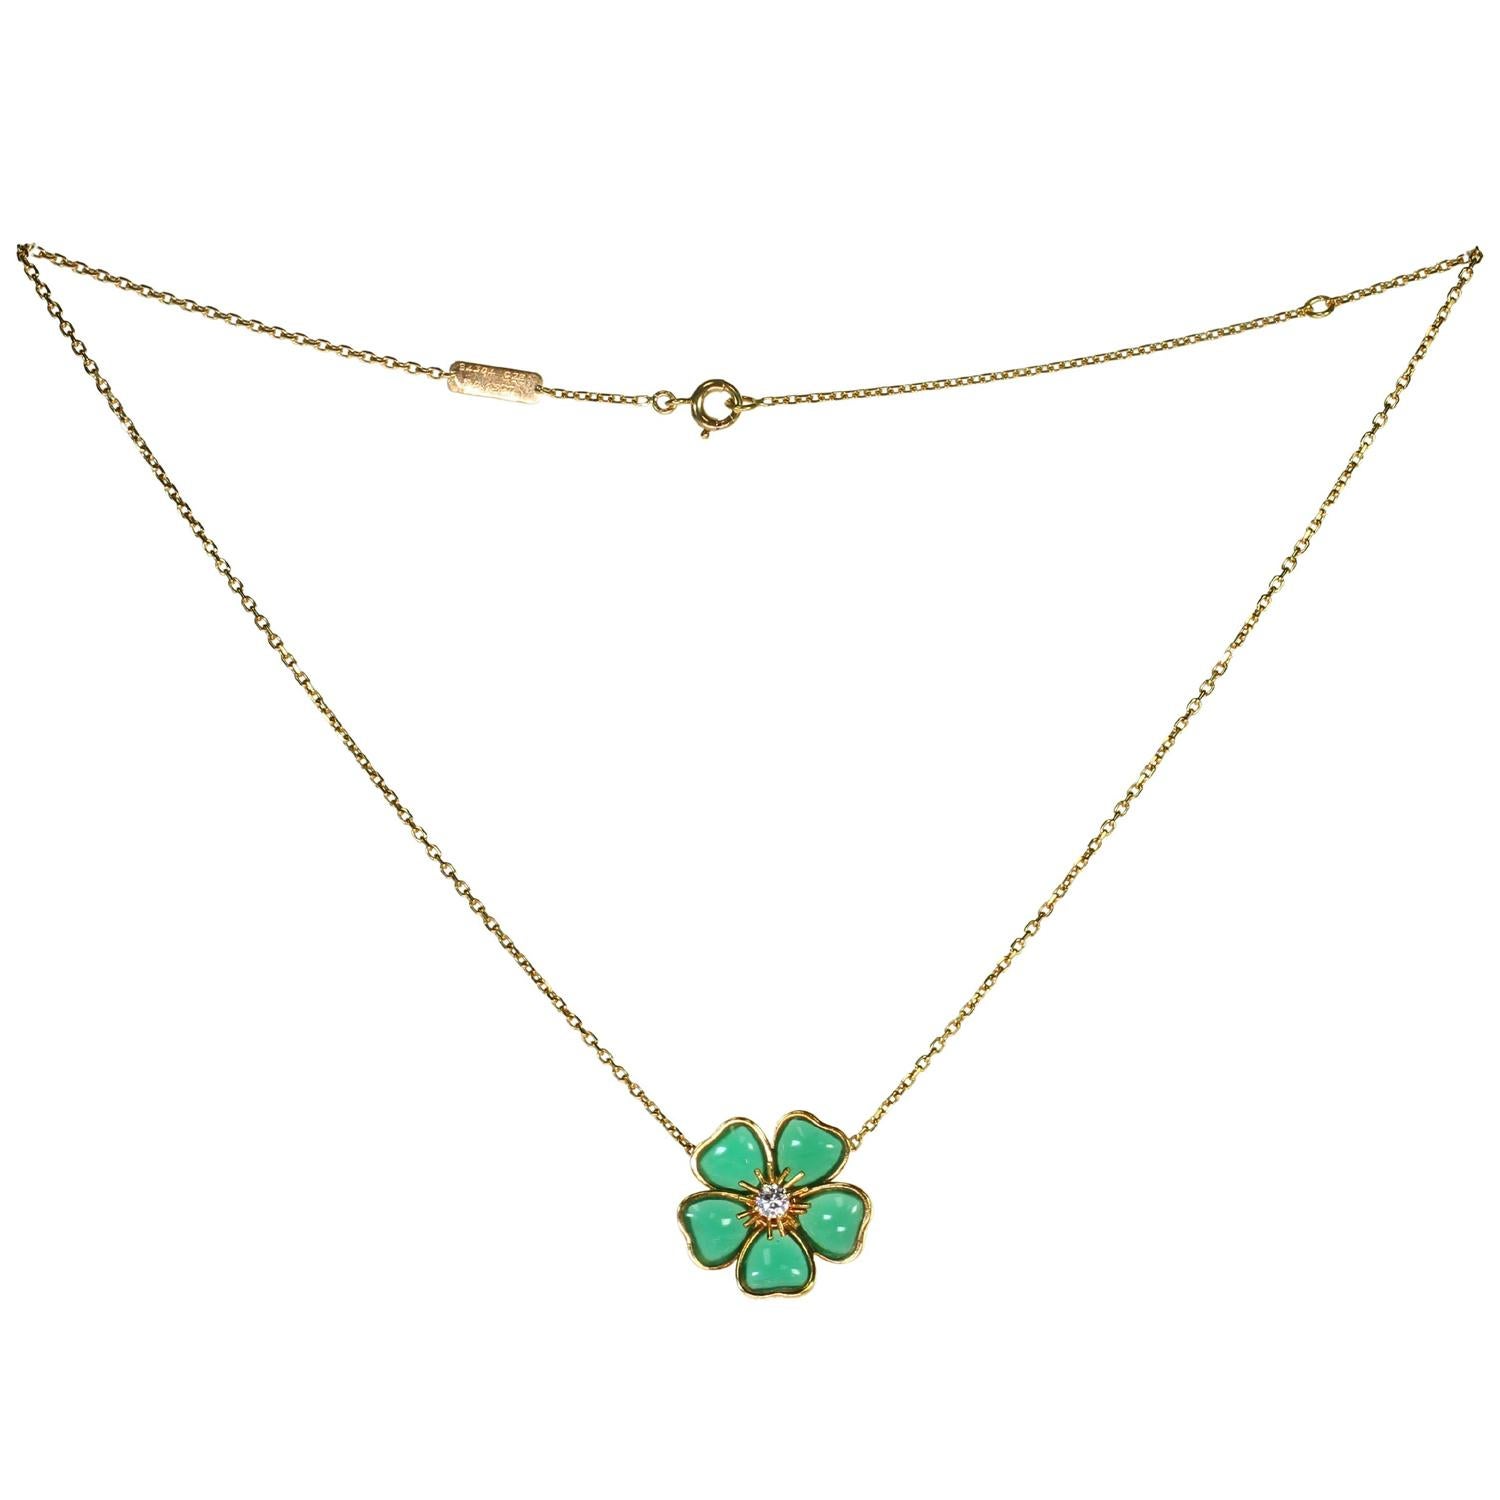 Brilliant Cut Van Cleef & Arpels Nerval Diamond Green Chalcedony 18k Yellow Gold Necklace For Sale